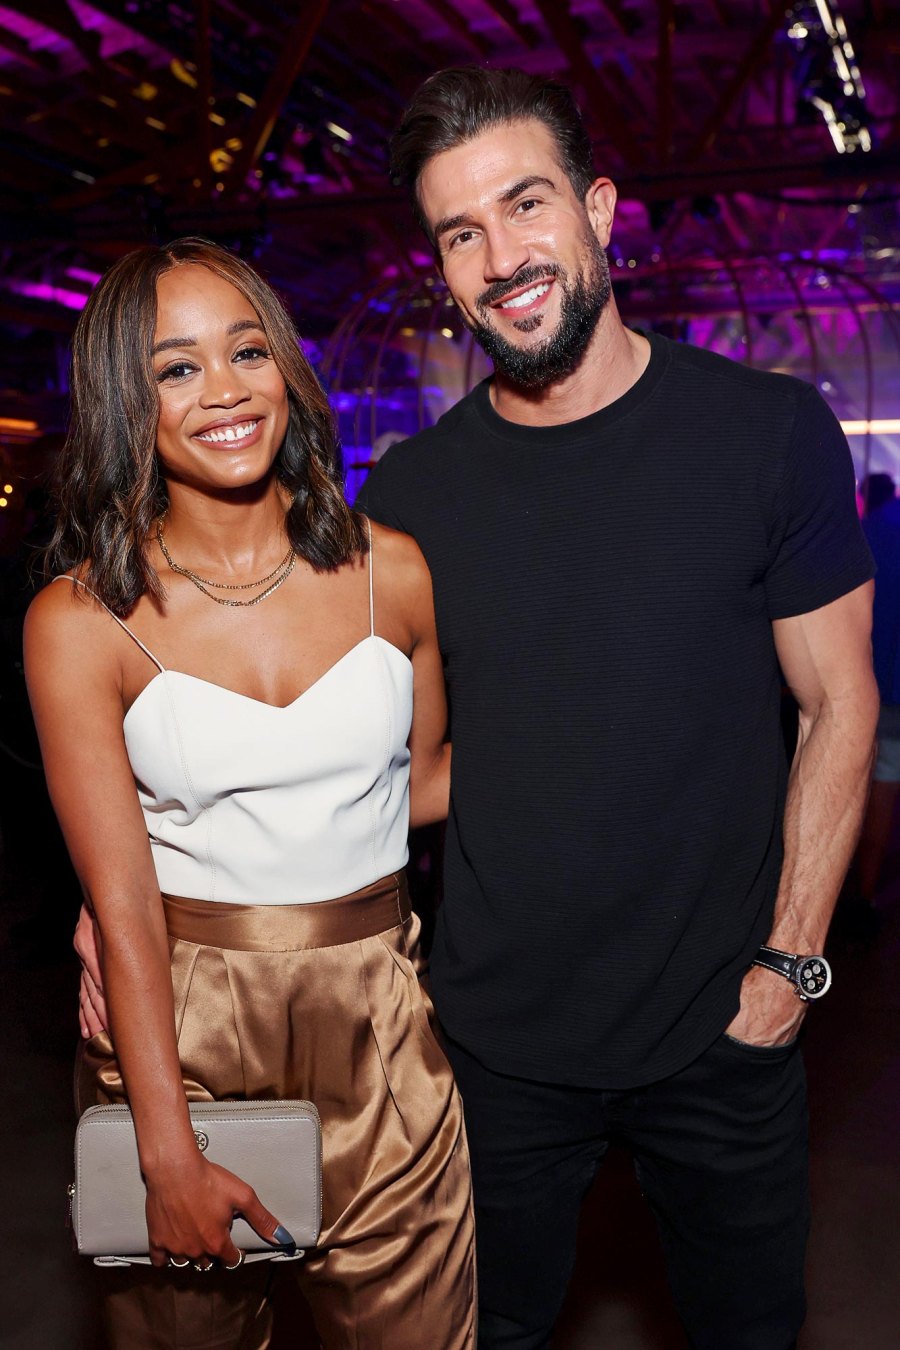 Celeb Couples Who Opened Up About Tackling Long-Distance Dating Prince Harry Meghan Markle and More GettyImages-1409637770 Rachel Lindsay and Bryan Abasolo